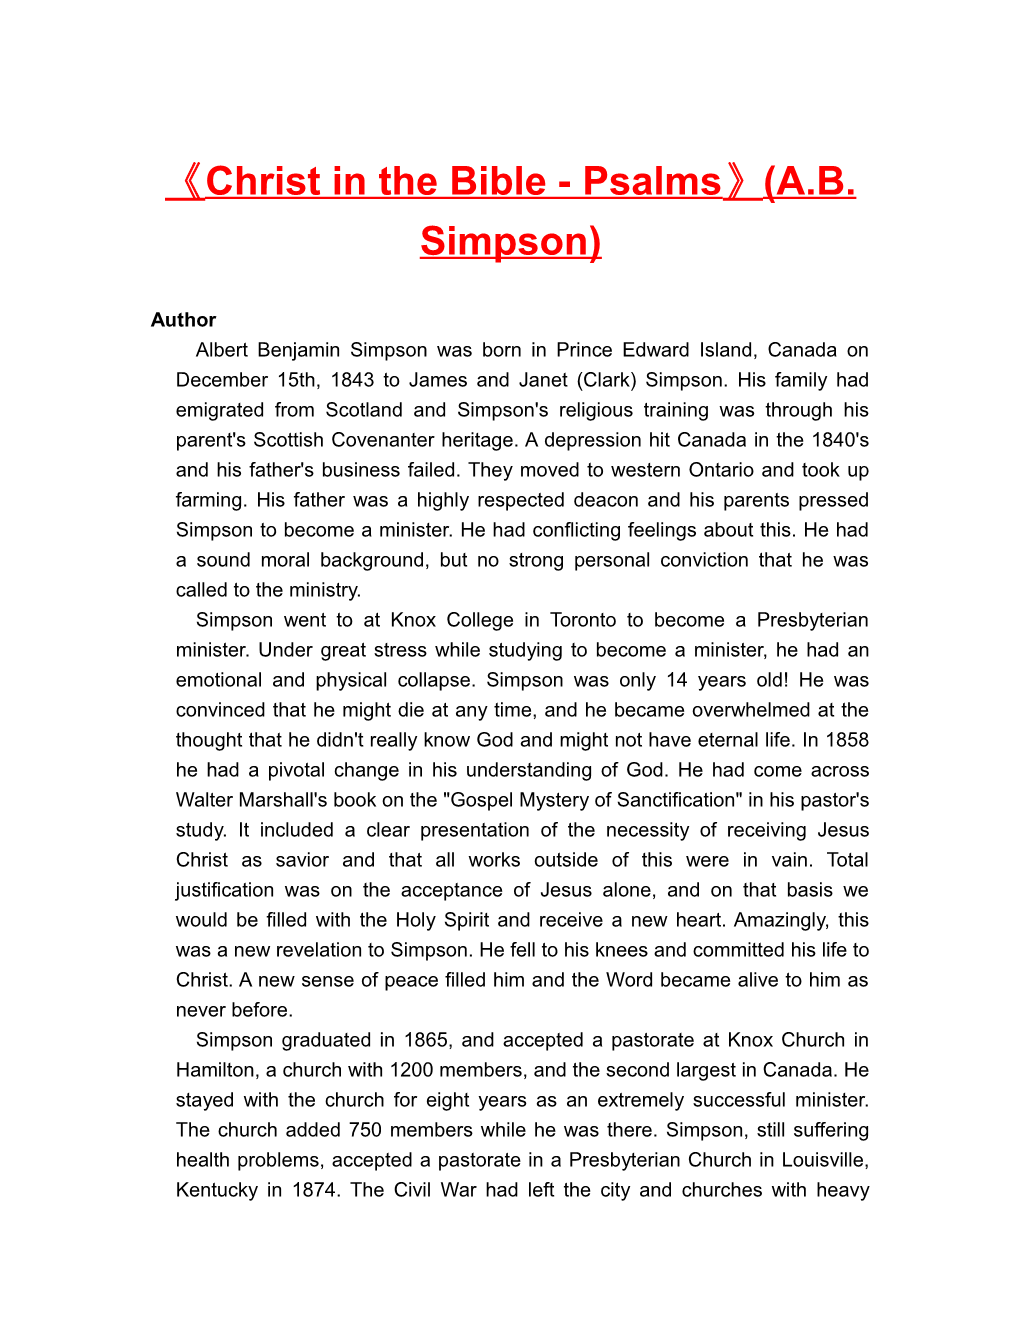 Christ in the Bible - Psalms (A.B. Simpson)